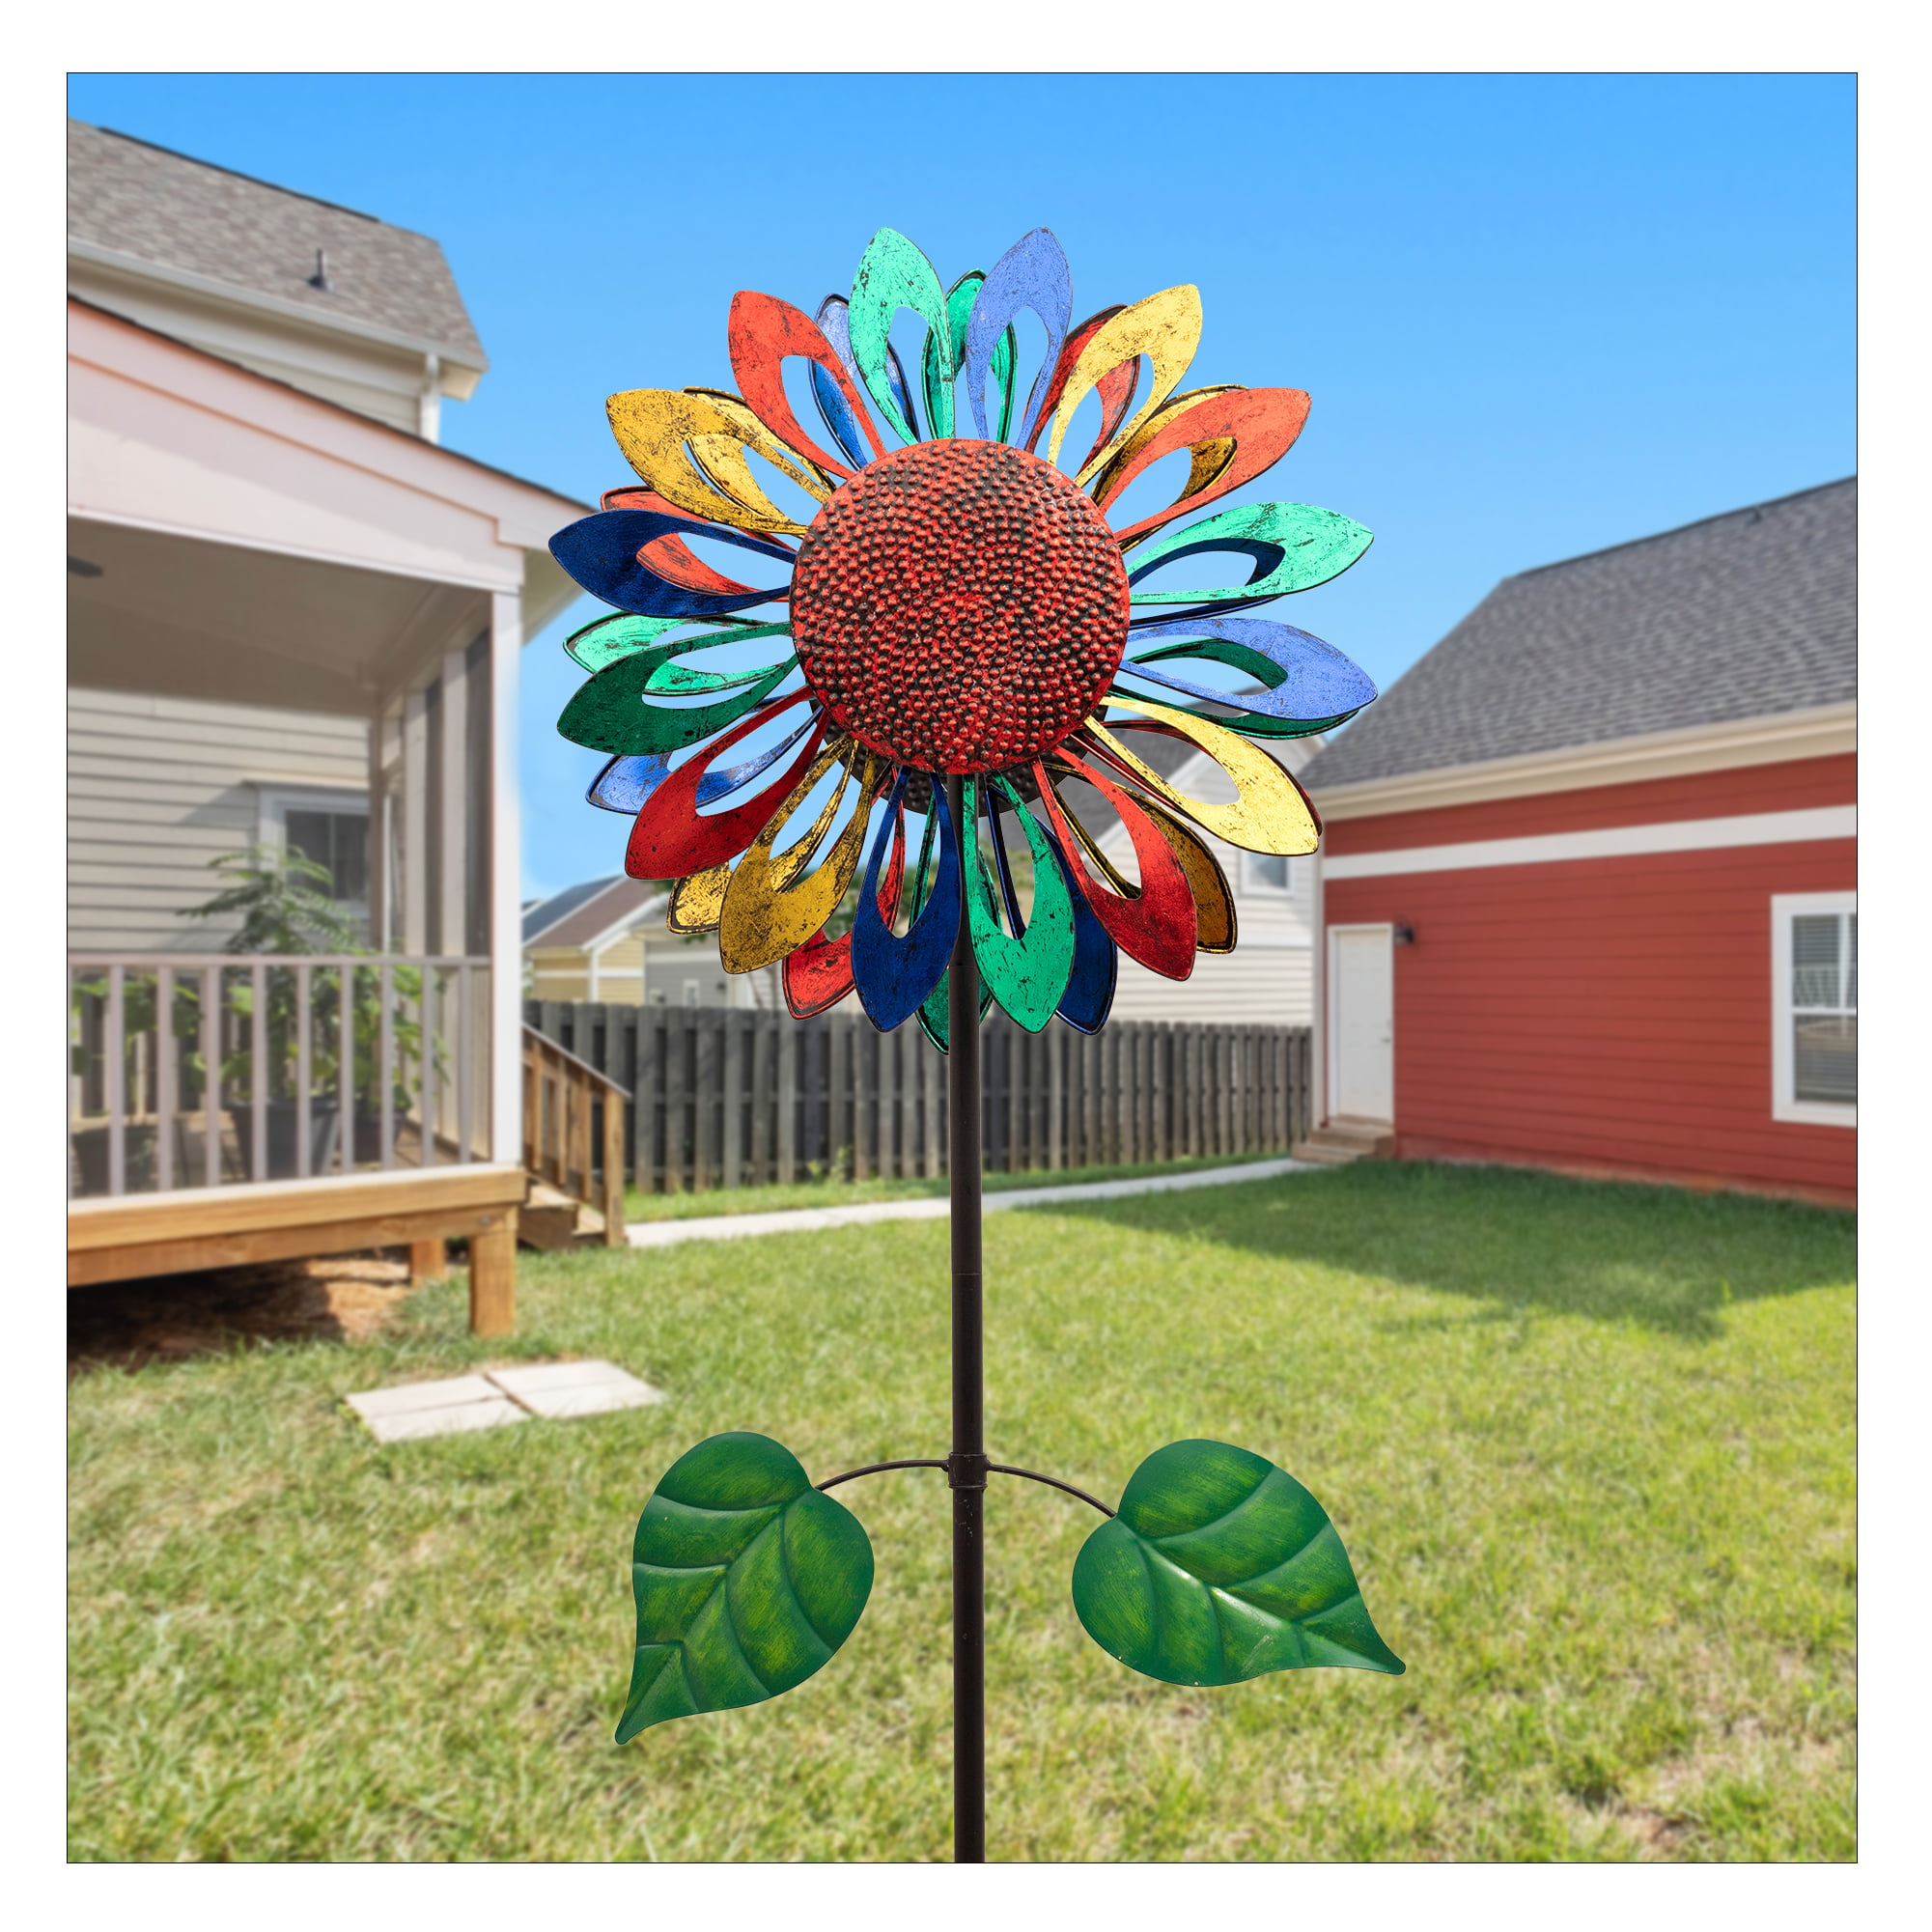 Diamond Beaded Dream Garden Stakes Home Decoration Flower Bed Colorful Glass Insert Ornament- Yard Lawn Decor Gardening Gifts for Children Patio Plant Pot A